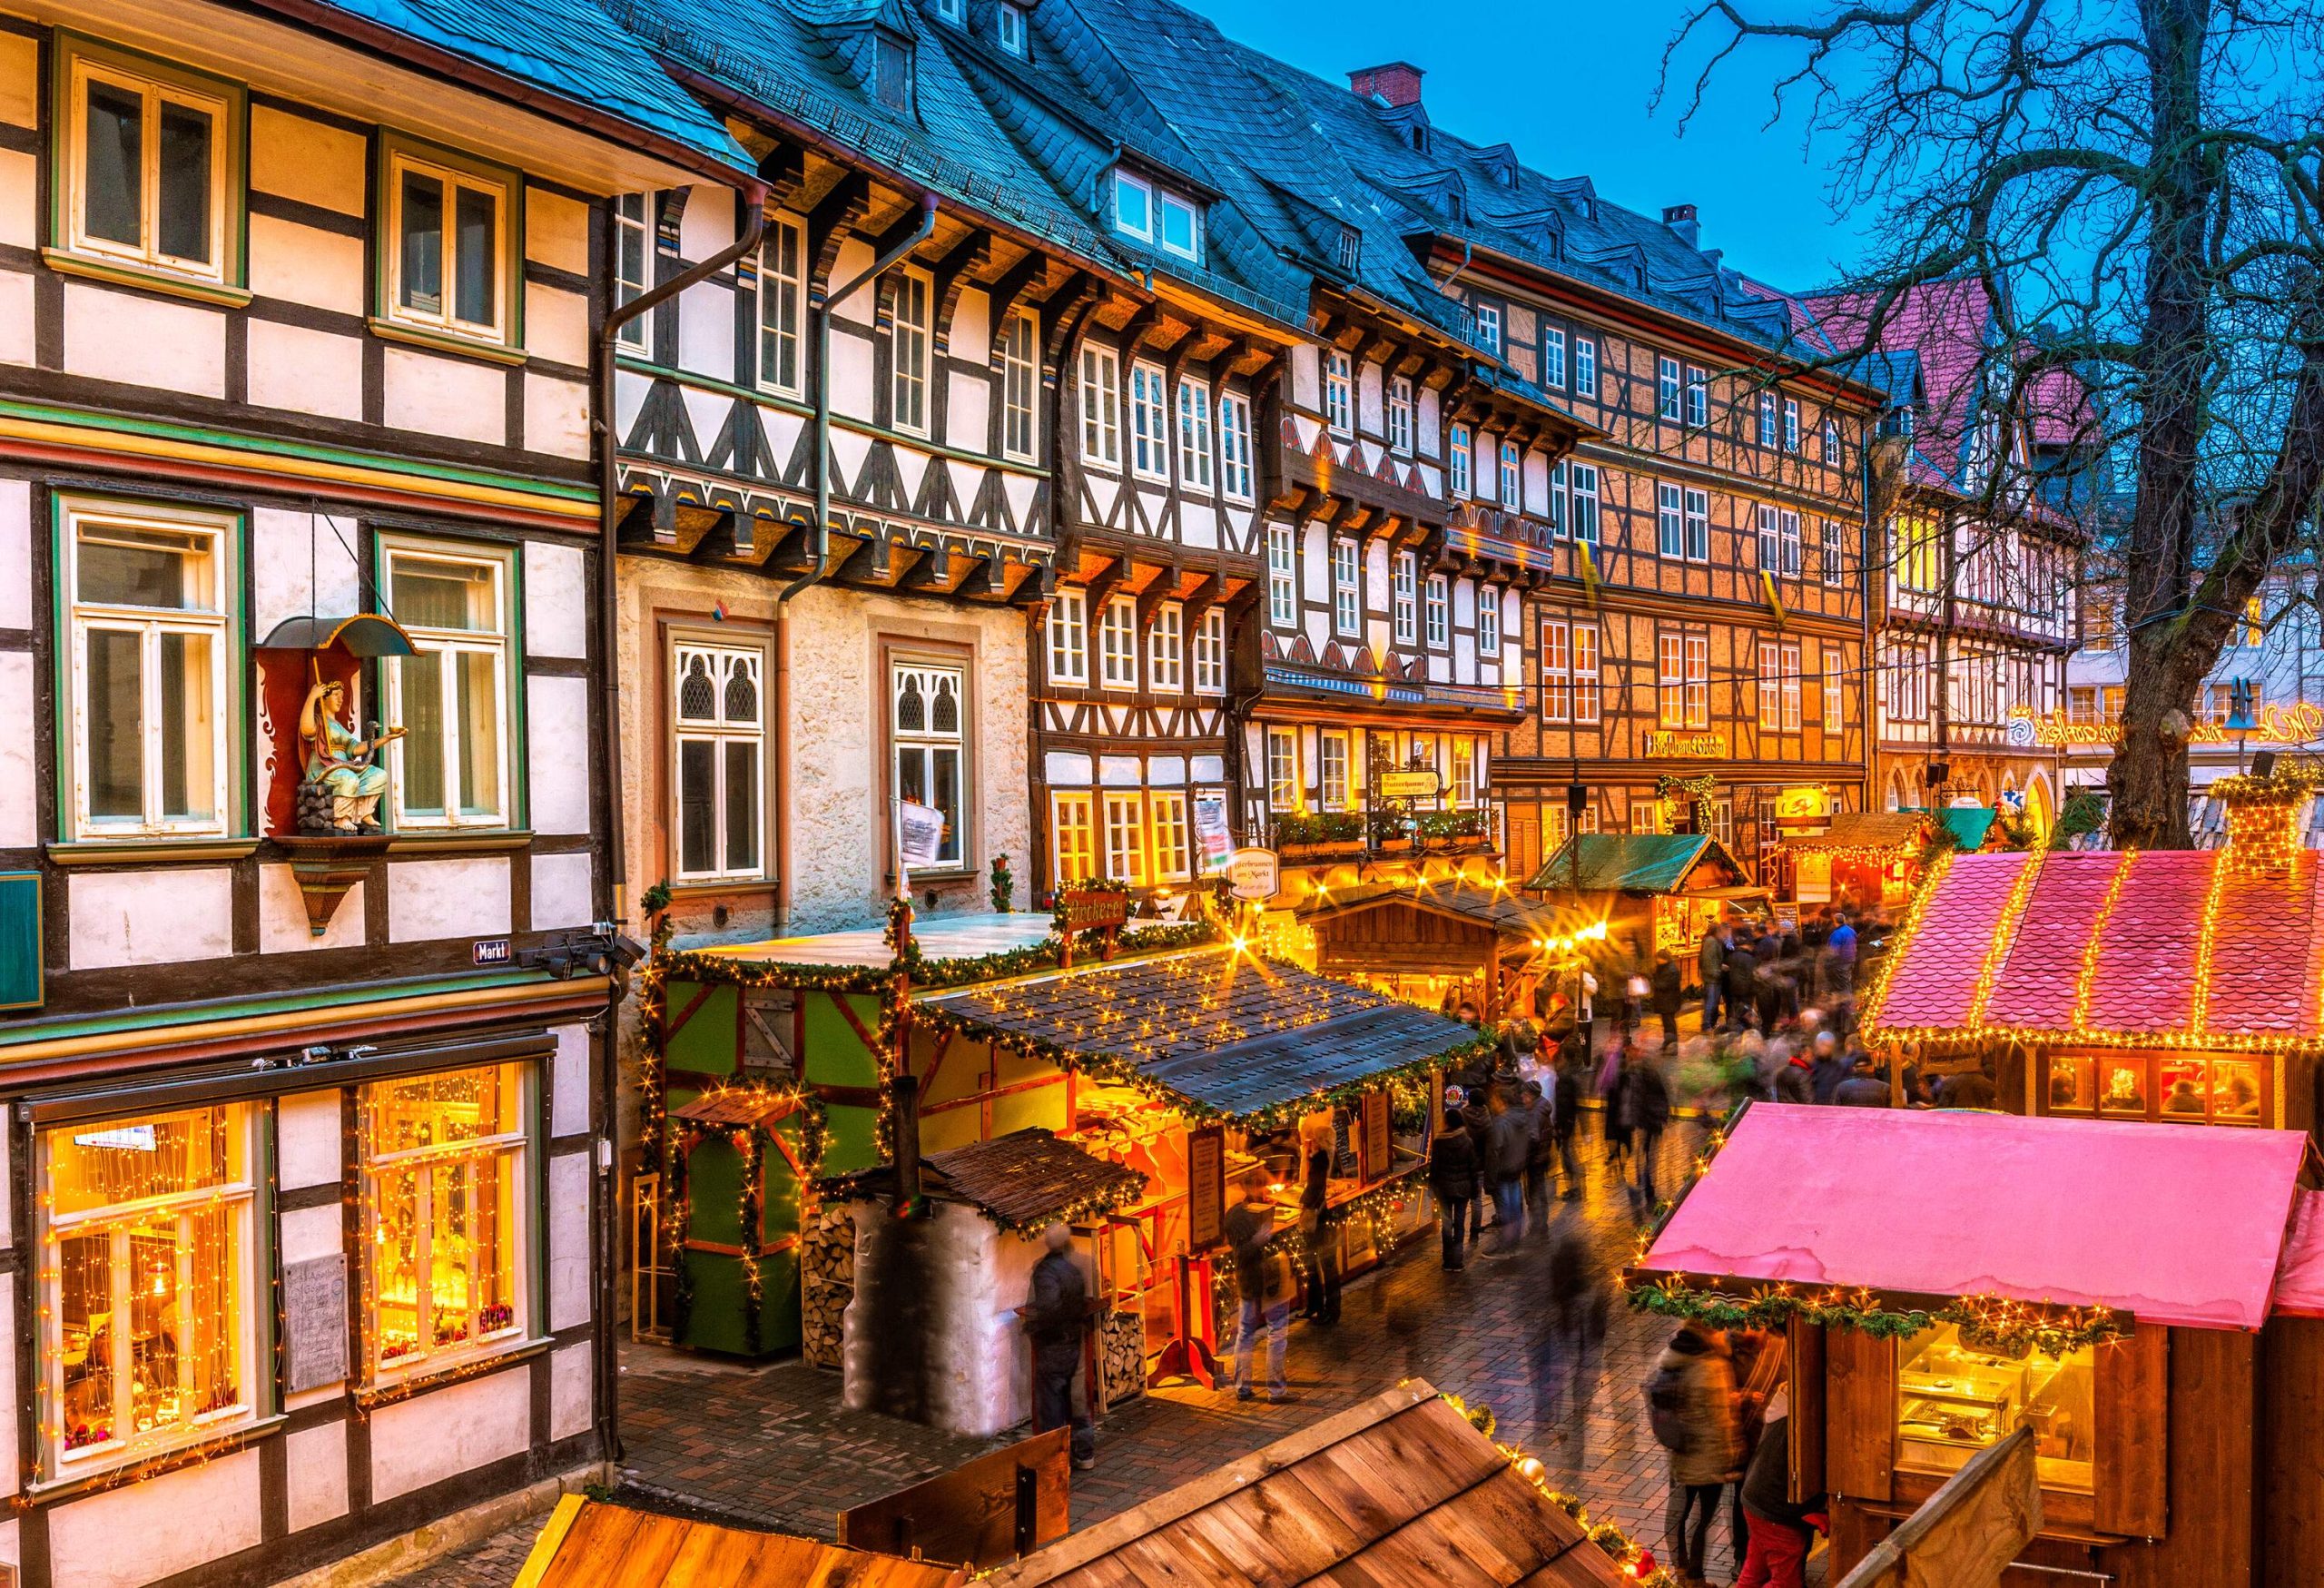 Half-timbered buildings behind Christmas shops decorated with lights.